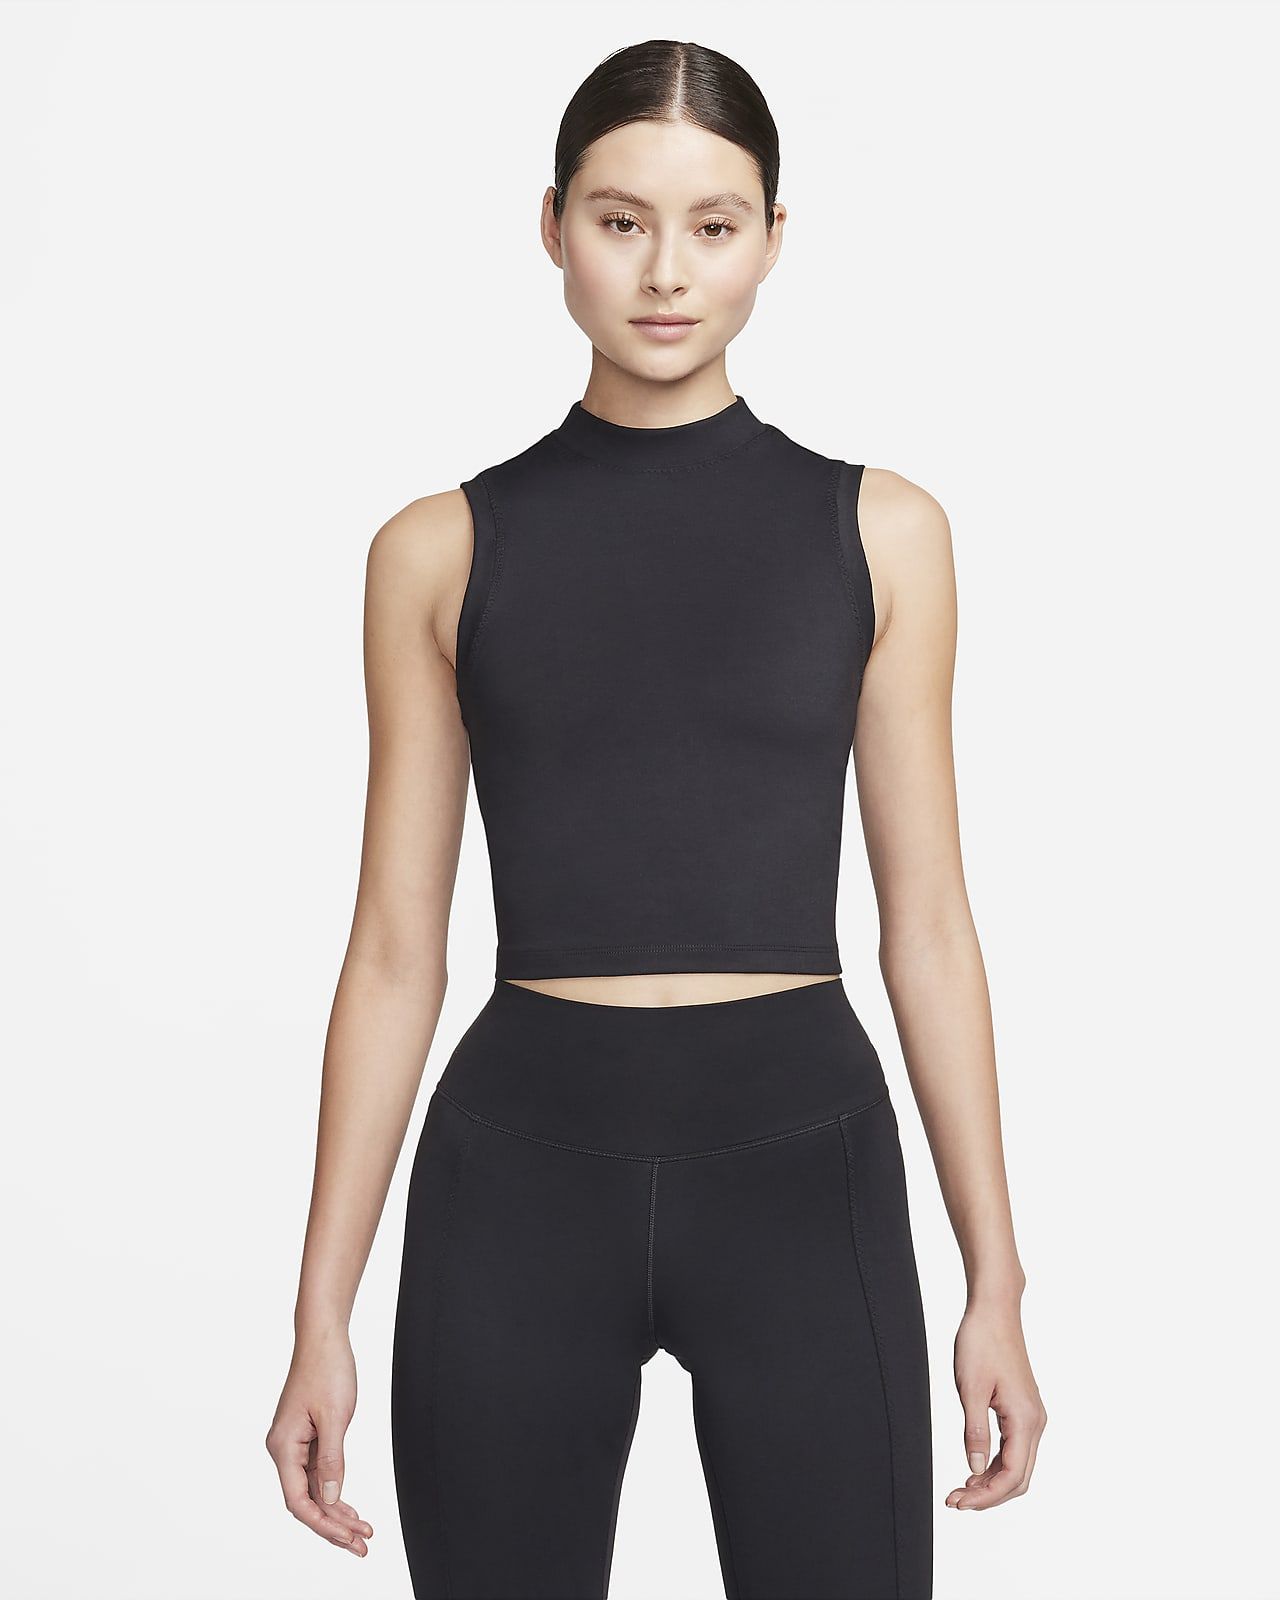 Nike One Fitted Women's Dri-FIT Mock-Neck Cropped Tank Top. Nike.com | Nike (US)